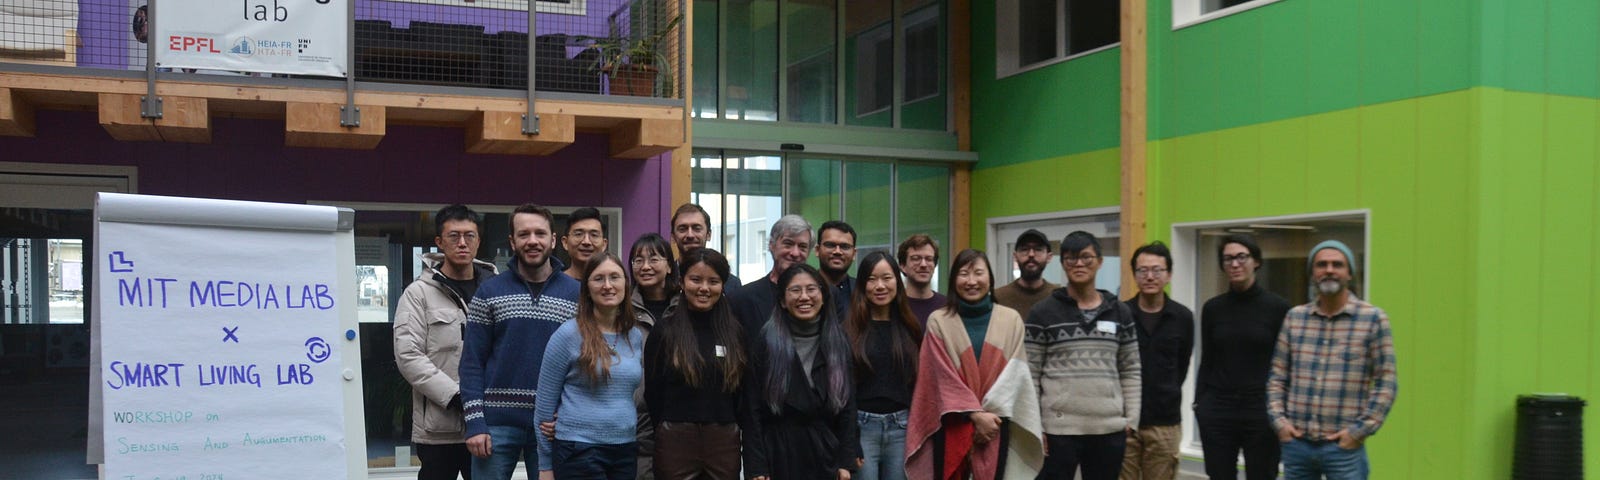 A group of people stand inside a building with green walls and turf flooring; a large white paper easel stands on the left side of the image with purple handwritten words on it saying “MIT Media Lab x Smart Living Lab.”